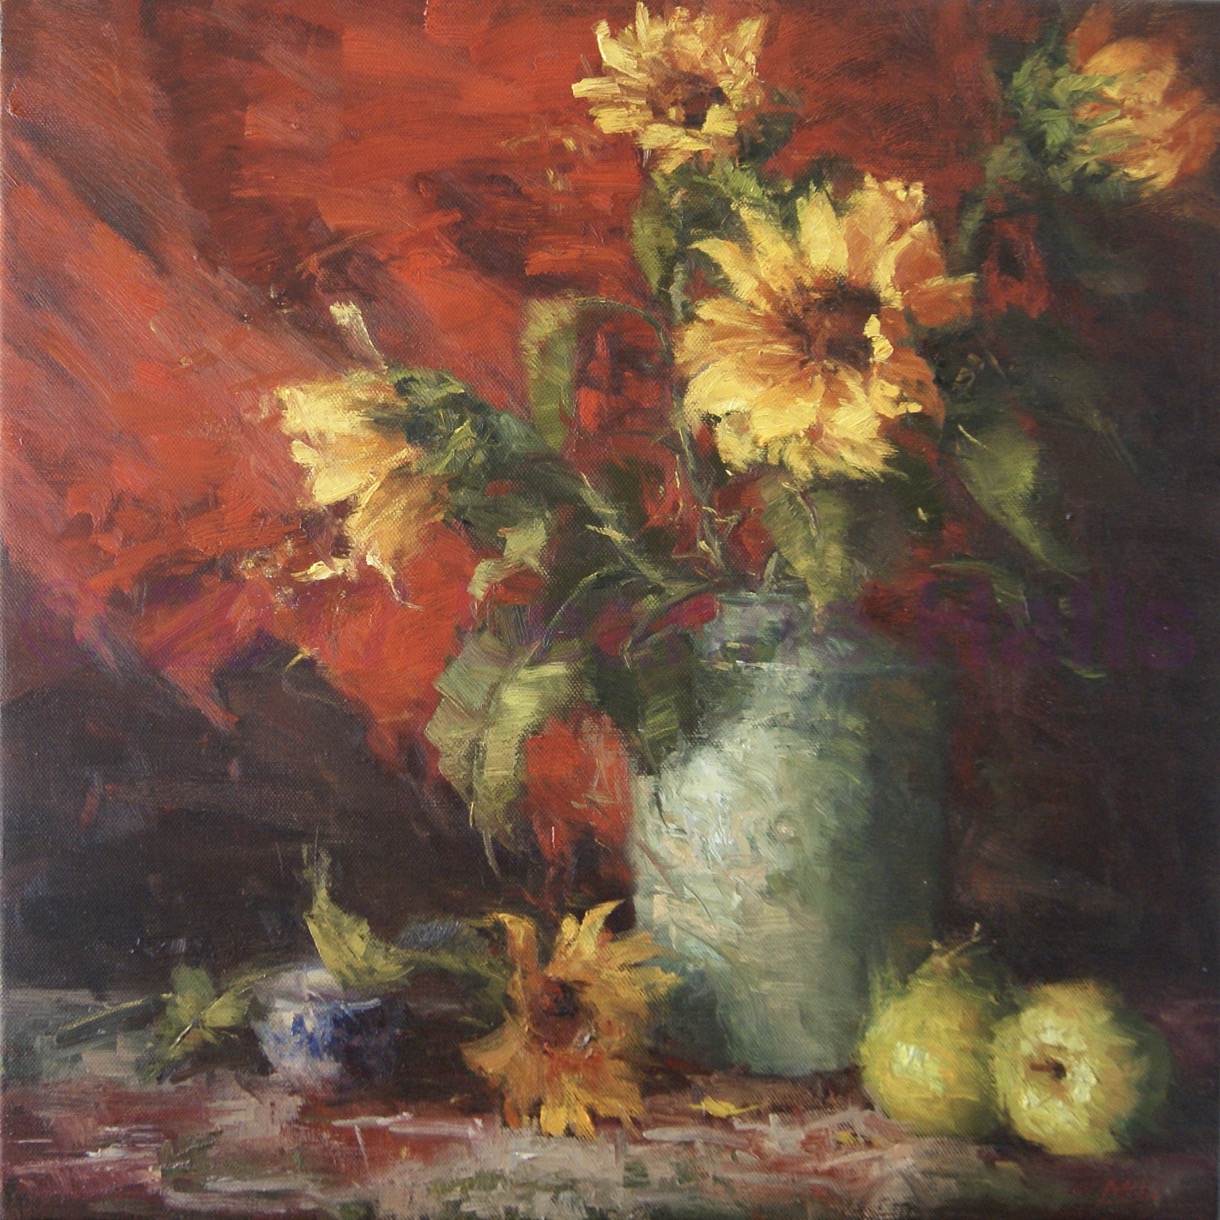 Sunflowers and Pears